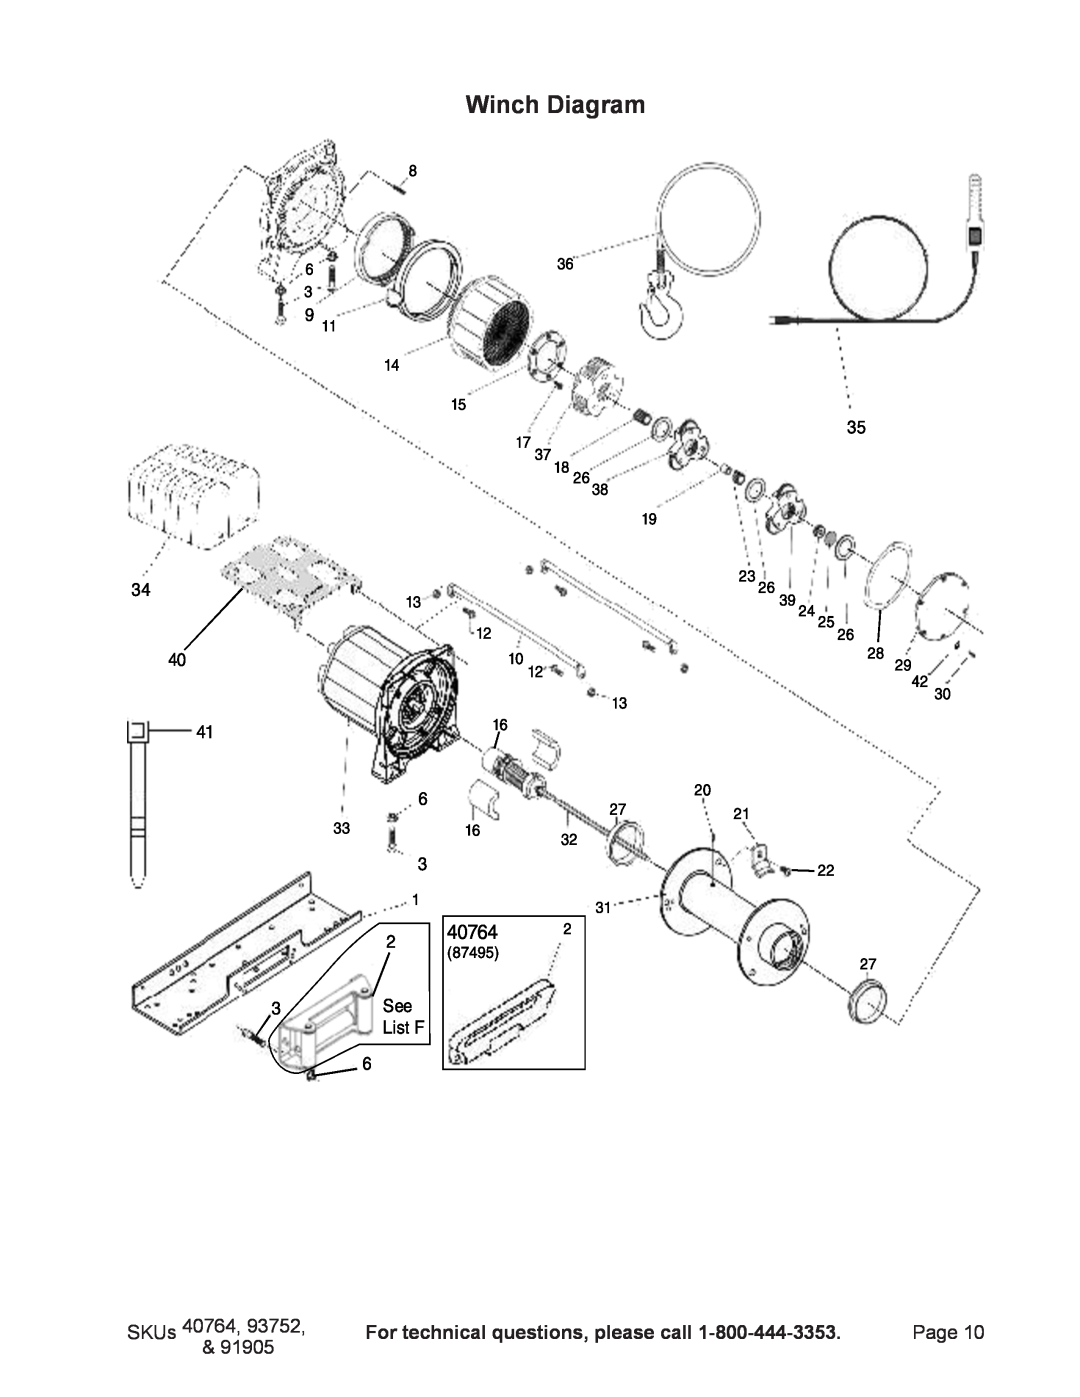 Chicago Electric 40764, 93752, 91905 manual Winch Diagram, SKUs, For technical questions, please call, Page 